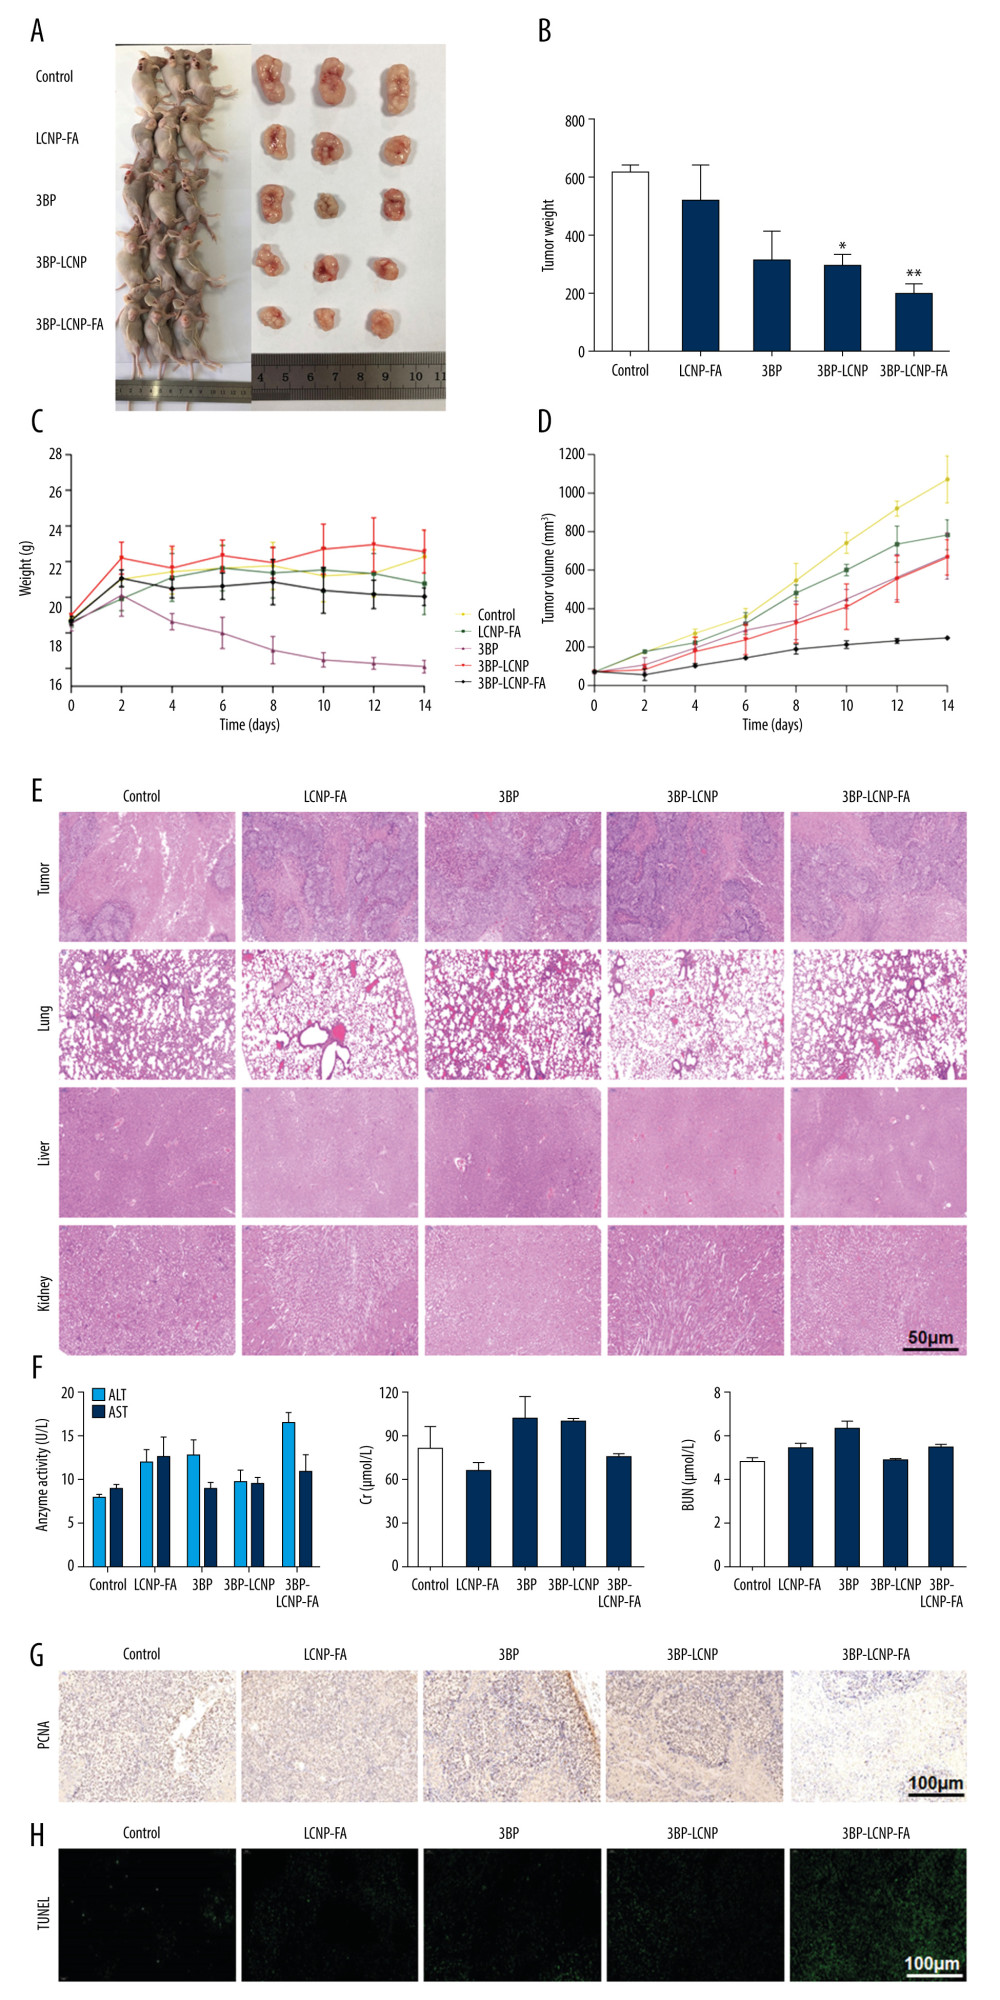 Antitumor activity evaluation of 3BP-LCNP-FA in vivo. (A) Formation of tumors in control, LCNP-FA, 3BP, 3BP-LCNP, and 3BP-LCNP-FA groups of mice. After nude mice were sacrificed in the last administration, tumor weights of different dosage groups were analyzed. (B) Data are presented as mean±S.D. (n=4) * P<0.05, ** P<0.01. (C) Change curves of mice weight and (D) tumor volume were measured at different time points after administration of different dosage forms. Data are presented as mean±S.D. (n=4). H &E staining of the tumors, lung, liver, and kidney after LCNP-FA, 3BP, 3BP-LCNP, and 3BP-LCNP-FA treatment vs. control. (E) The images are representative of three independent experiments. After LCNP-FA, 3BP, 3BP-LCNP, and 3BP-LCNP-FA treatment, the levels of AST, ALT, Cr, and BUN were evaluated by taking orbital venous blood. (F) Data represent the Mean±S.D. (n=6). PCNA immunohistochemistry of LCNP, 3BP, 3BP-LCNP, and 3BP-LCNP-FA treatment. (G) The images are representative of three independent experiments. TUNEL assay of LCNP, 3BP, 3BP-LCNP, and 3BP-LCNP-FA treatment. (H) The images are representative of three independent experiments.